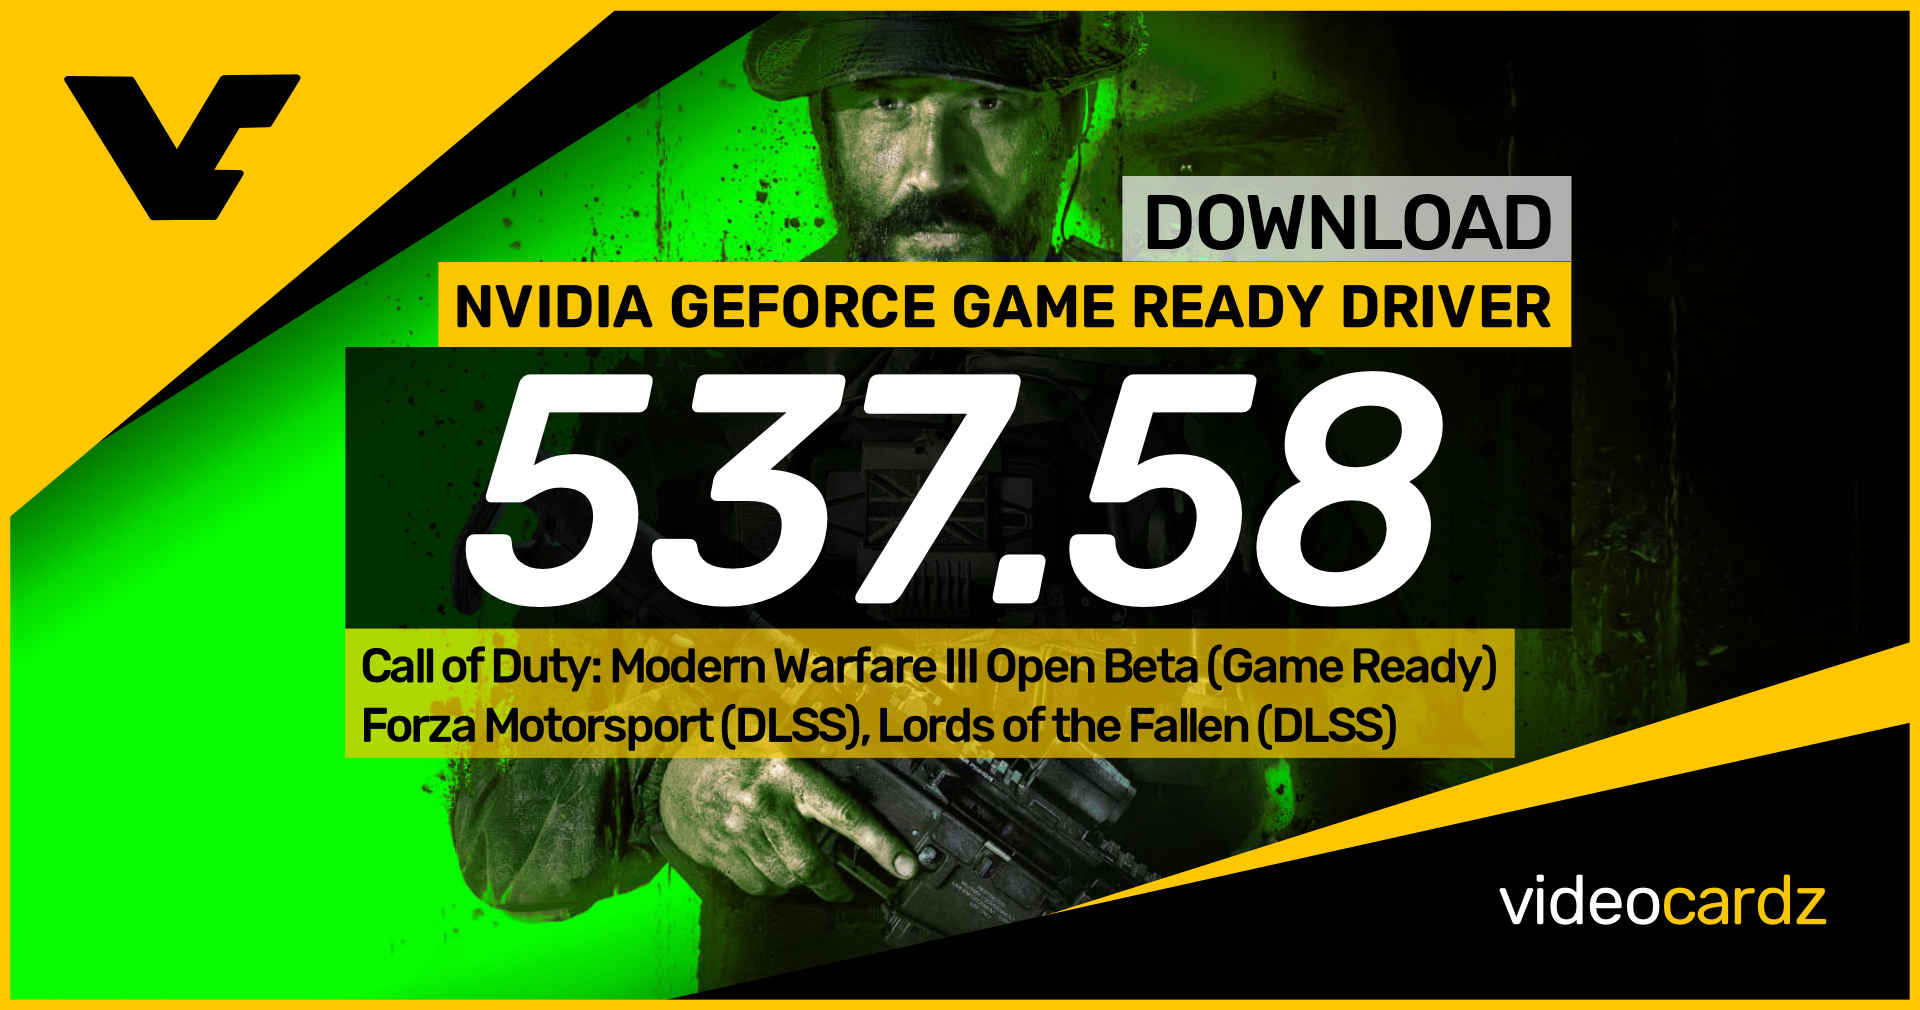 Game Ready Driver Released For Call of Duty: Modern Warfare III Multiplayer  Open Beta, Forza Motorsport & Lords of the Fallen, GeForce News